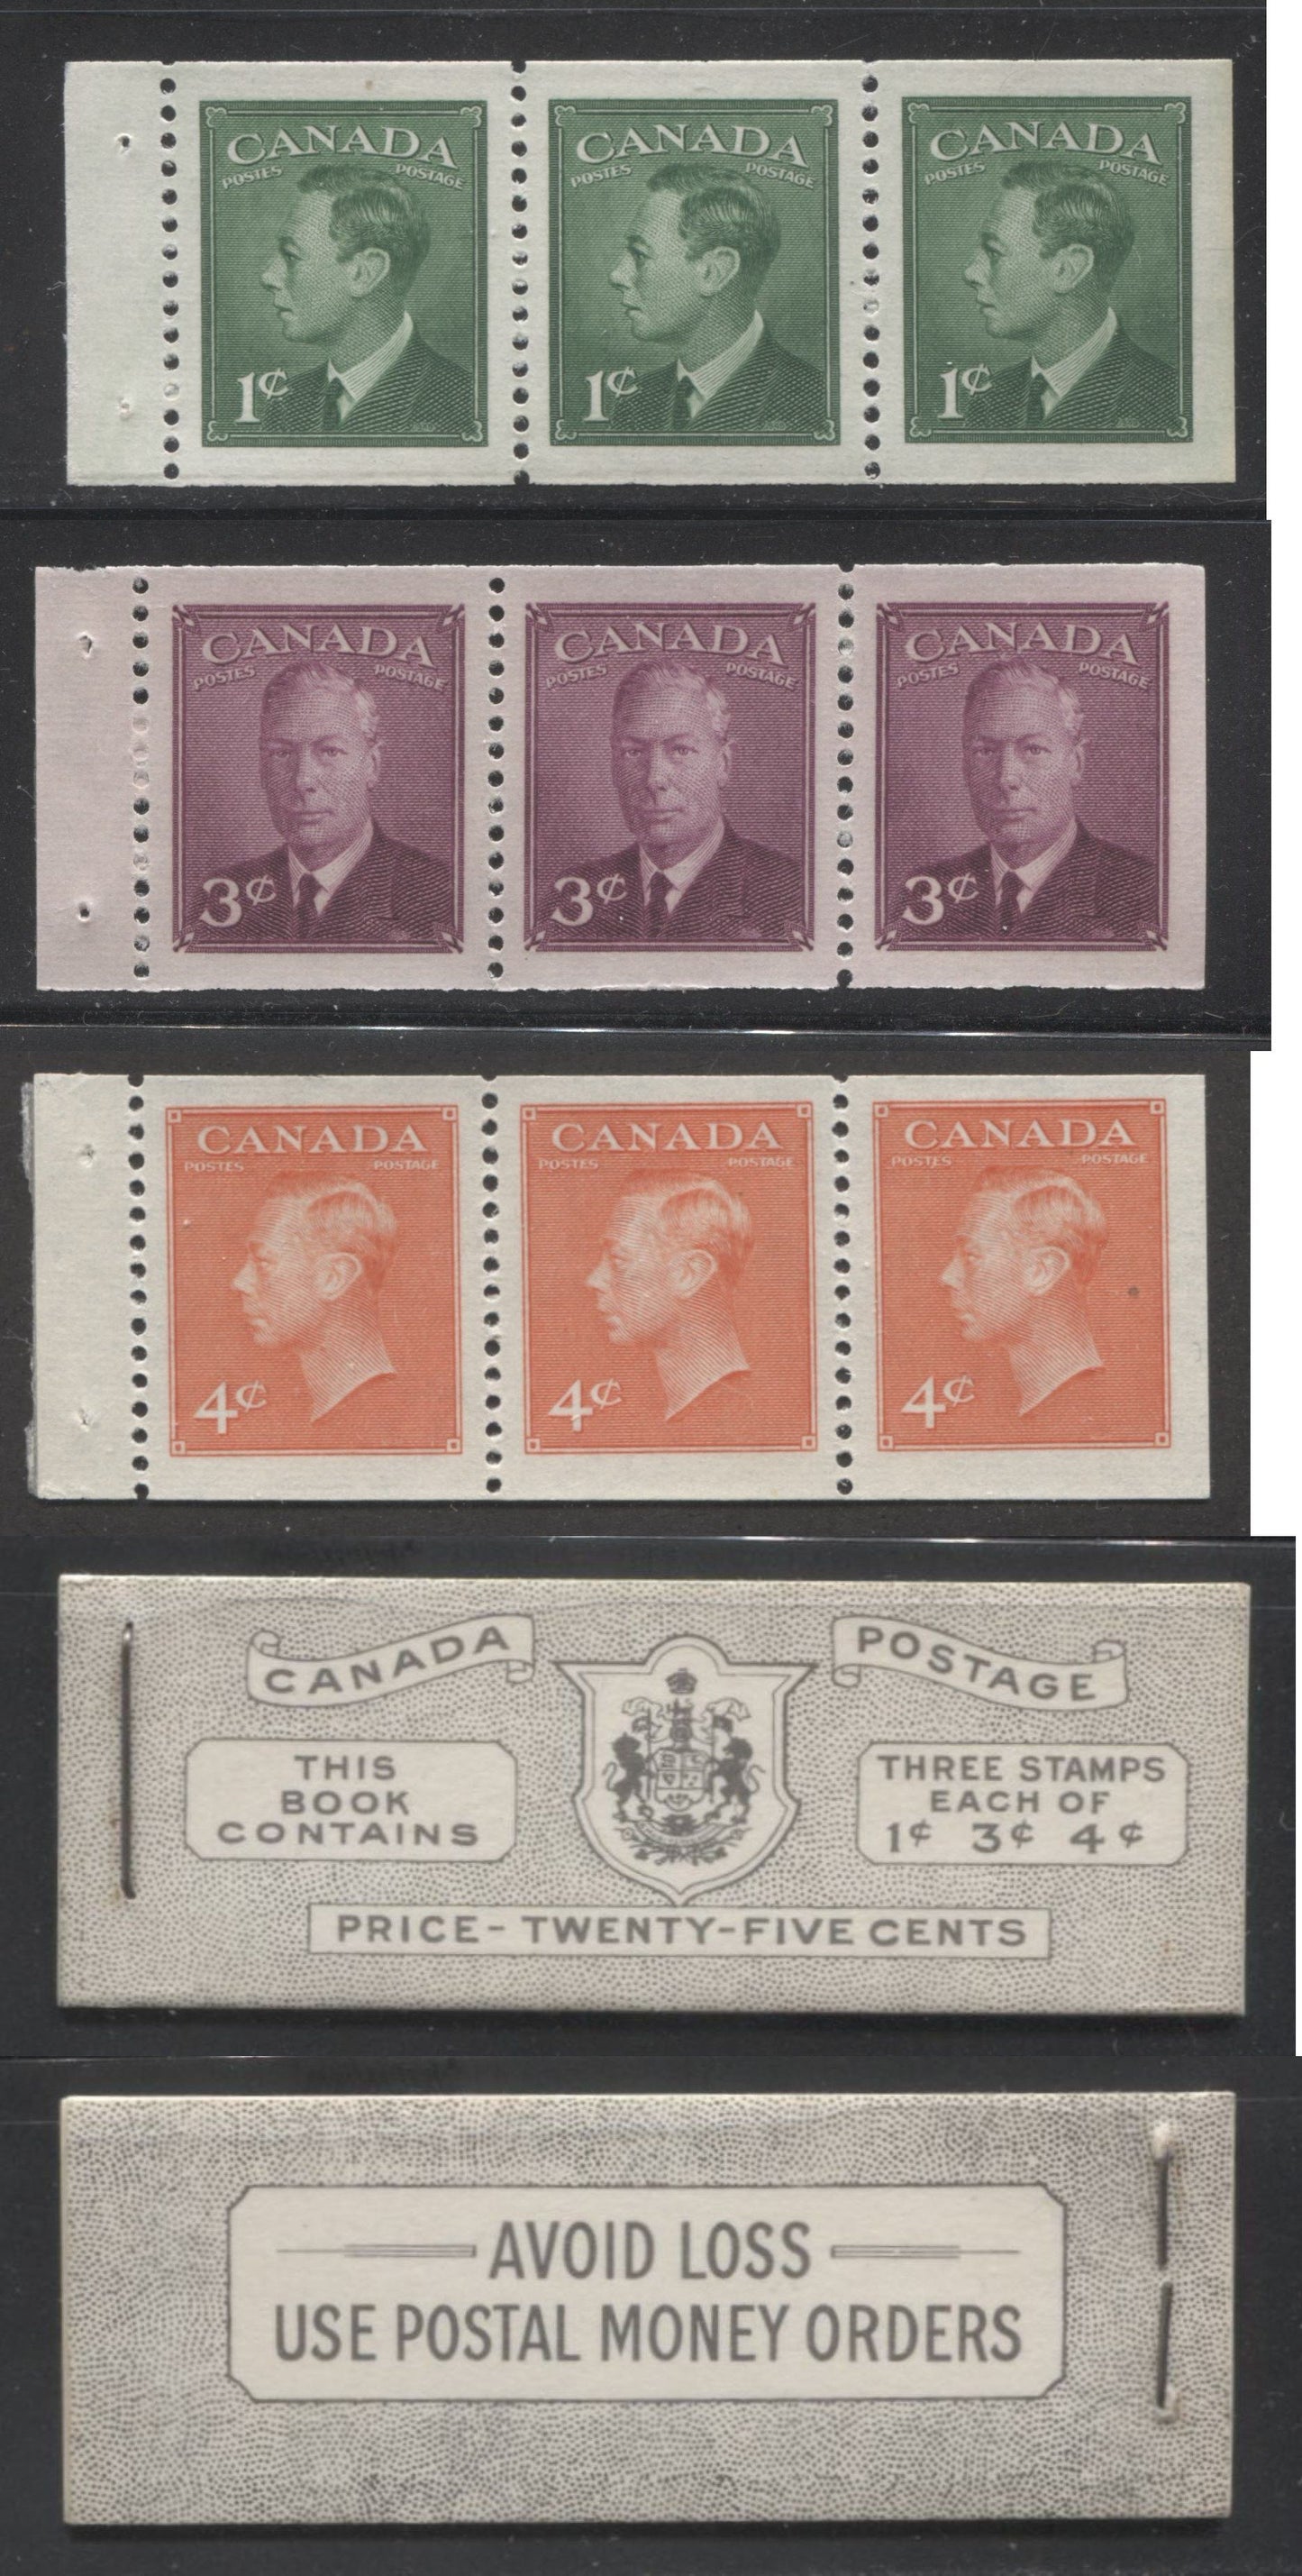 Canada #BK44 1949-1953 Postes-Postage Issue Complete 25c, English Booklet Containing 1 Pane of 3 of Each of the 1c Green, 3c Rose Purple and 4c Orange King George VI Harris Front Cover Type IVc , Back Cover Ii Brixton Chrome 